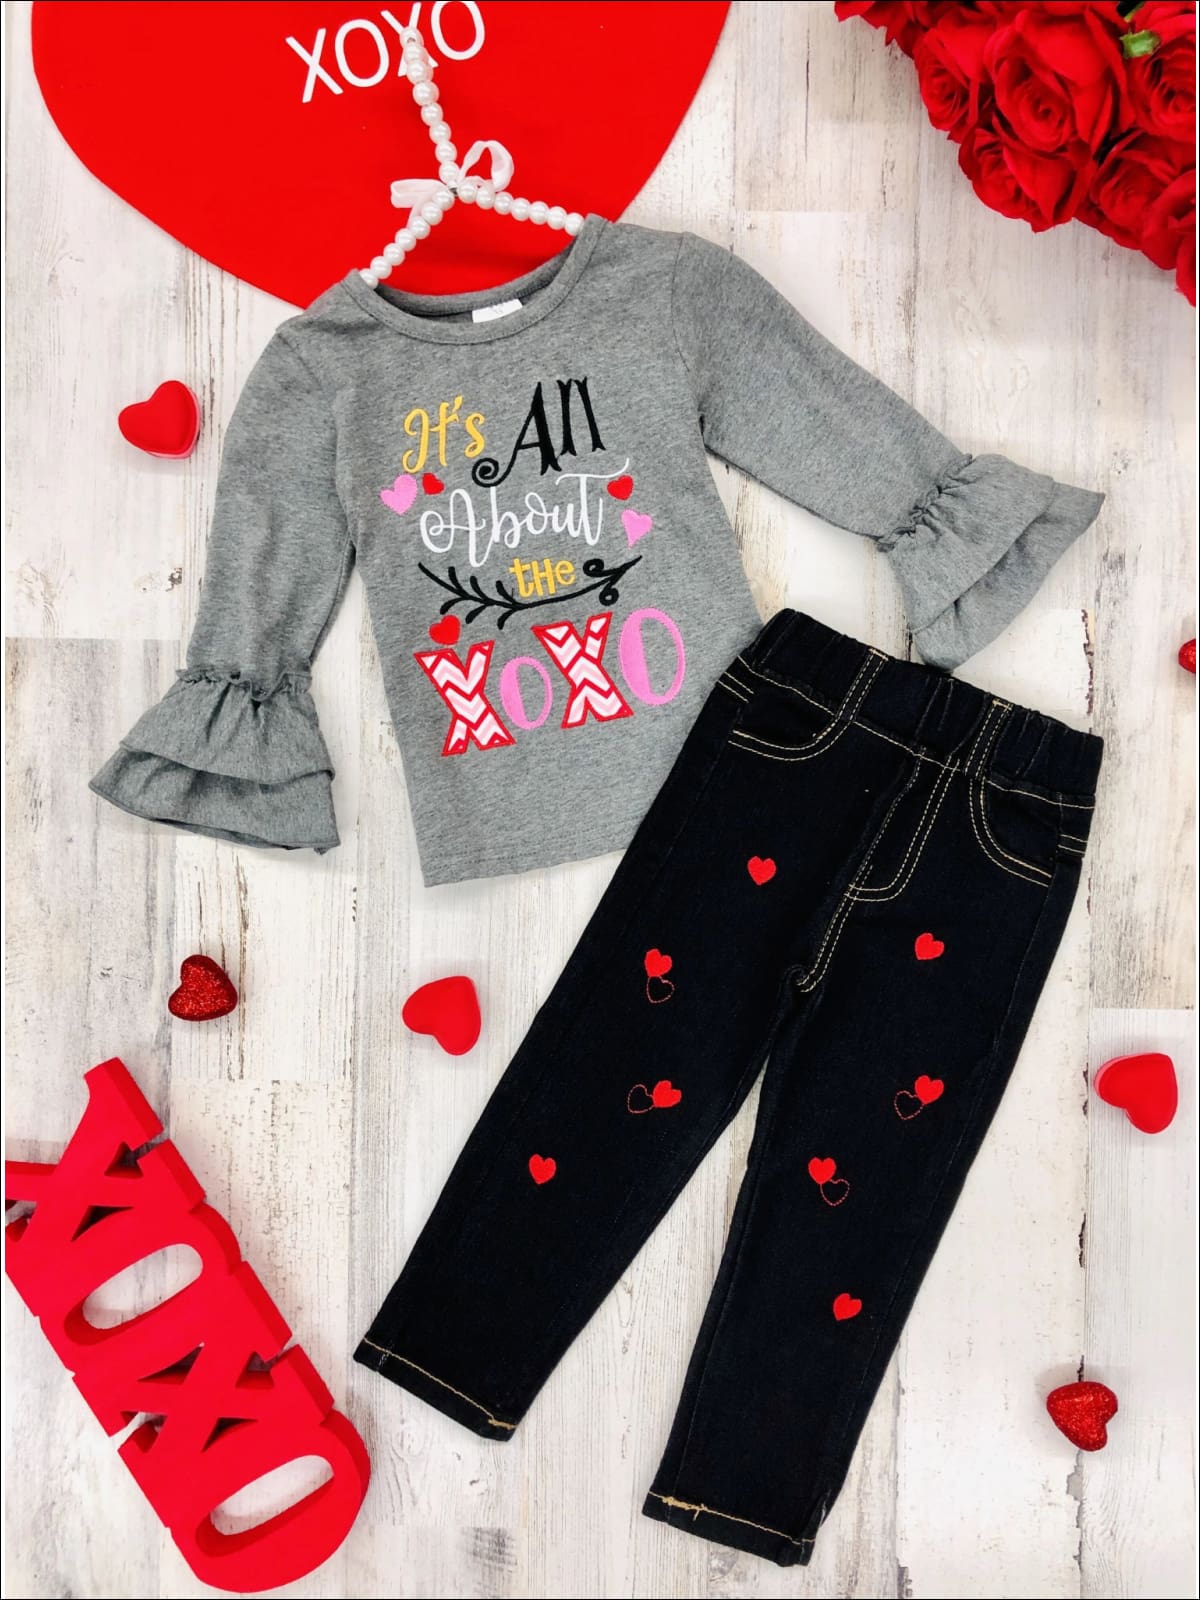 Girls All About the XOXO Ruffled Top & Heart Patch Jeans - Grey / 2T - Girls Fall Casual Set